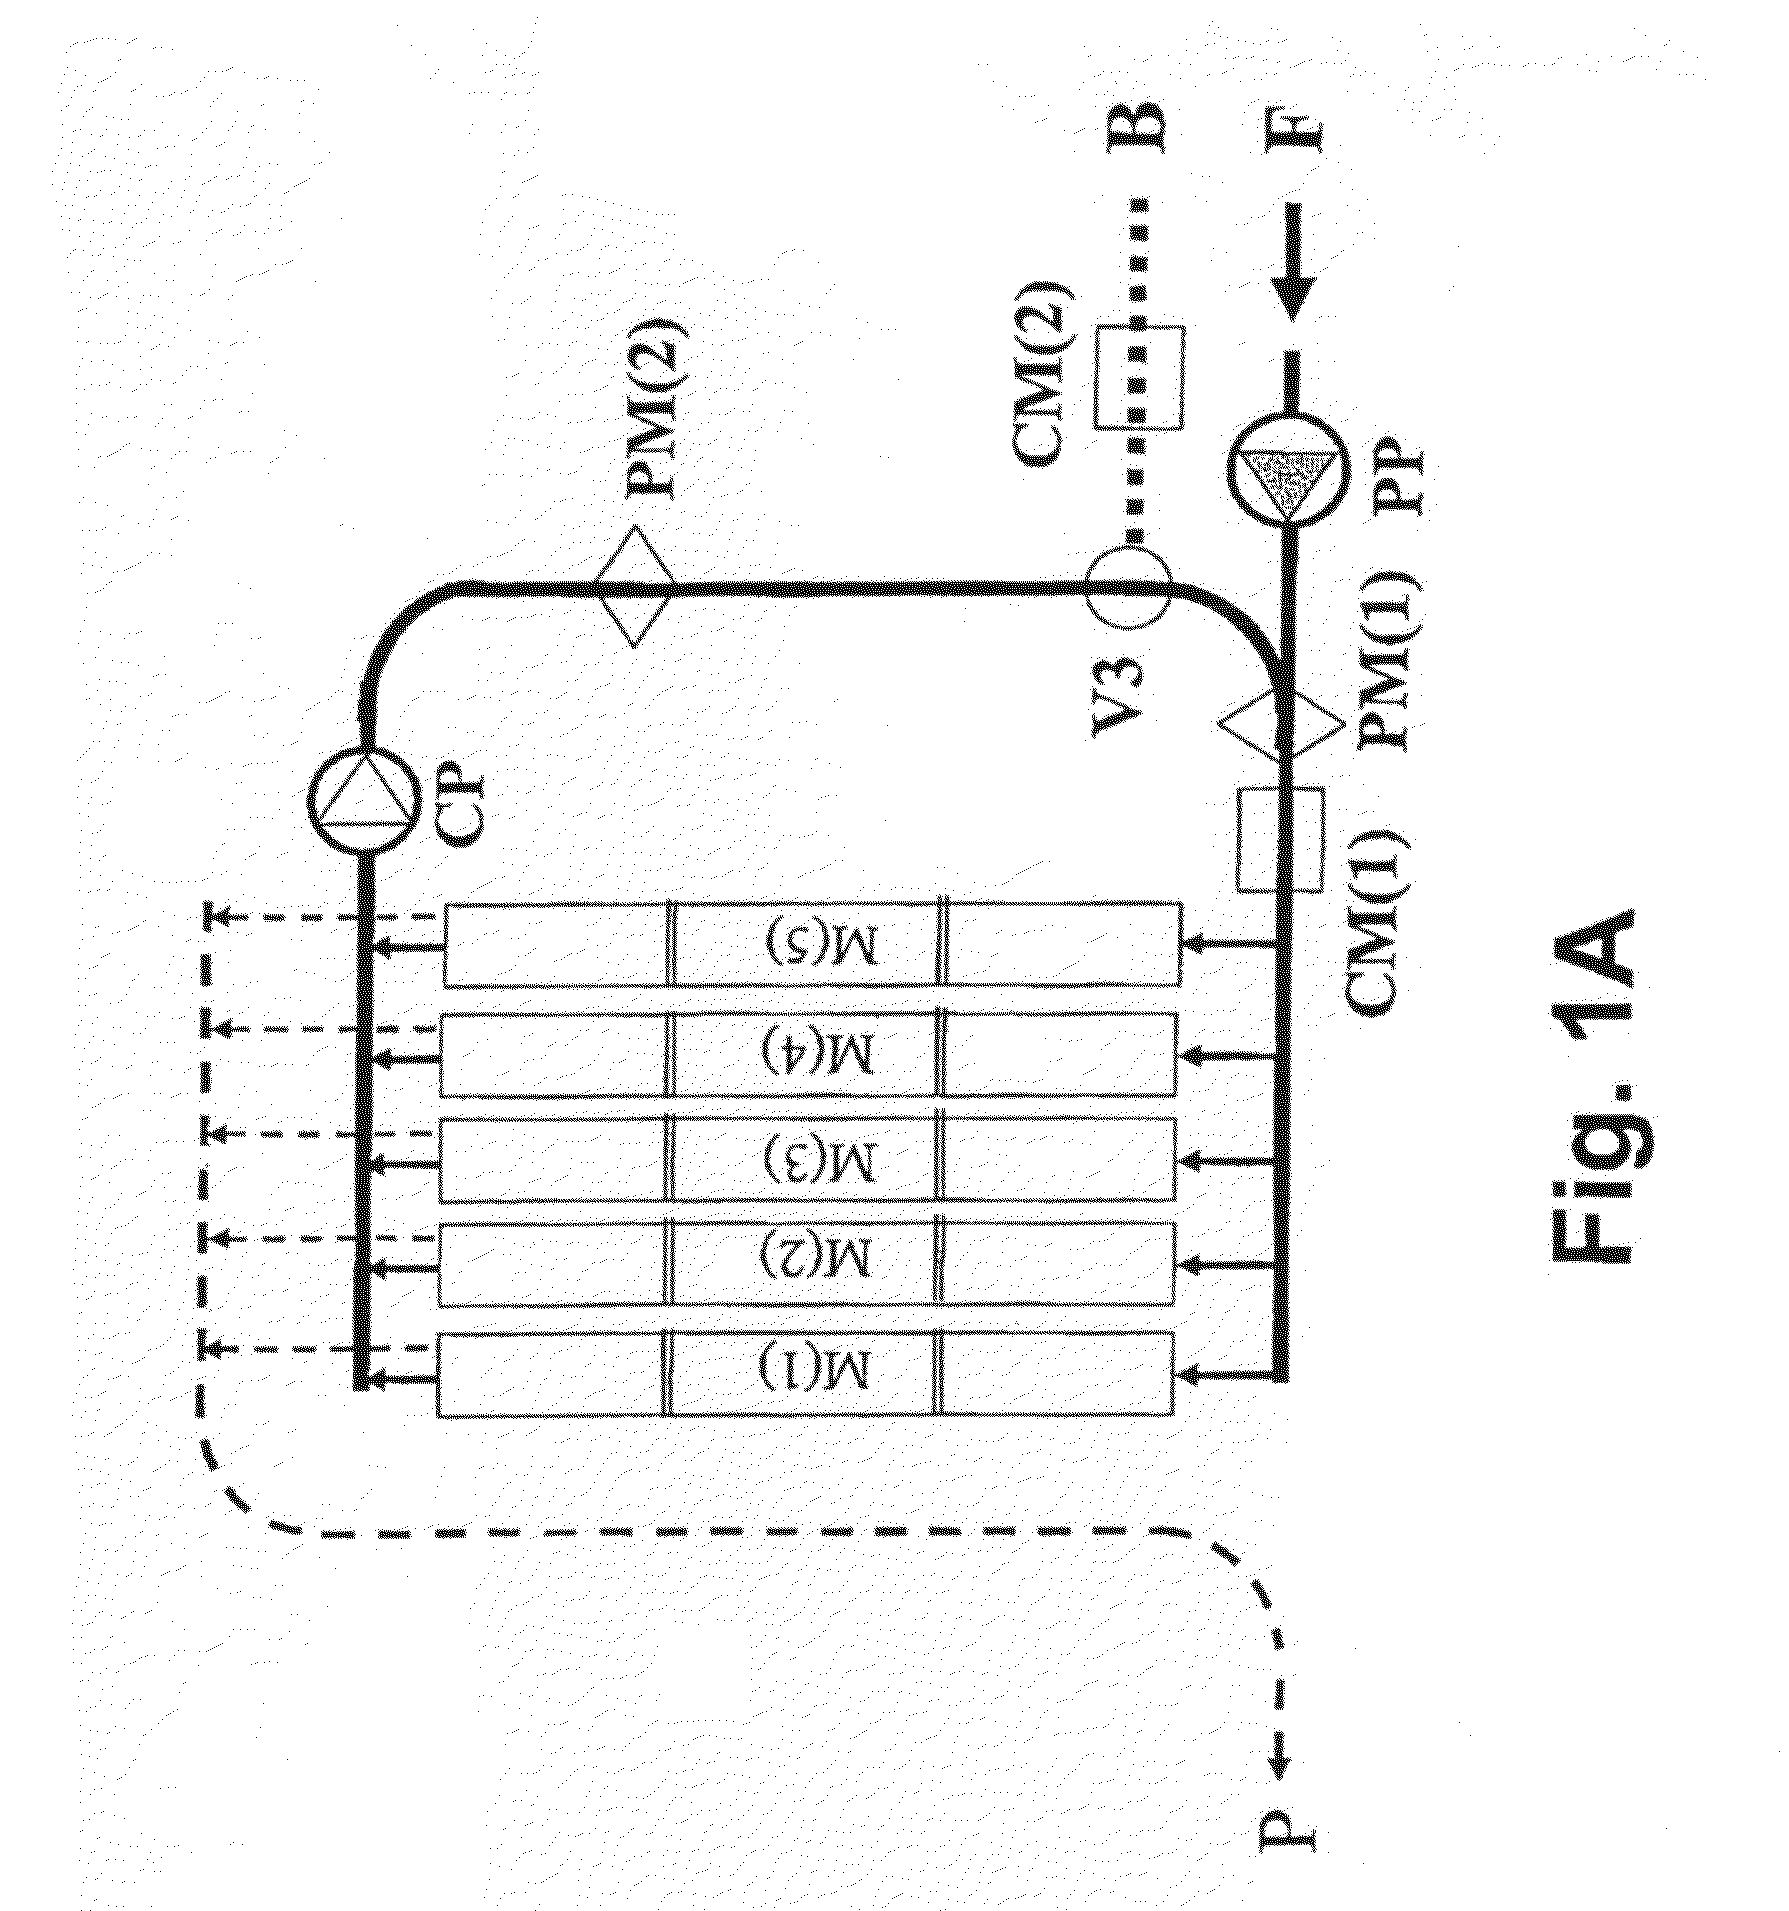 Continuous closed-circuit desalination method without containers